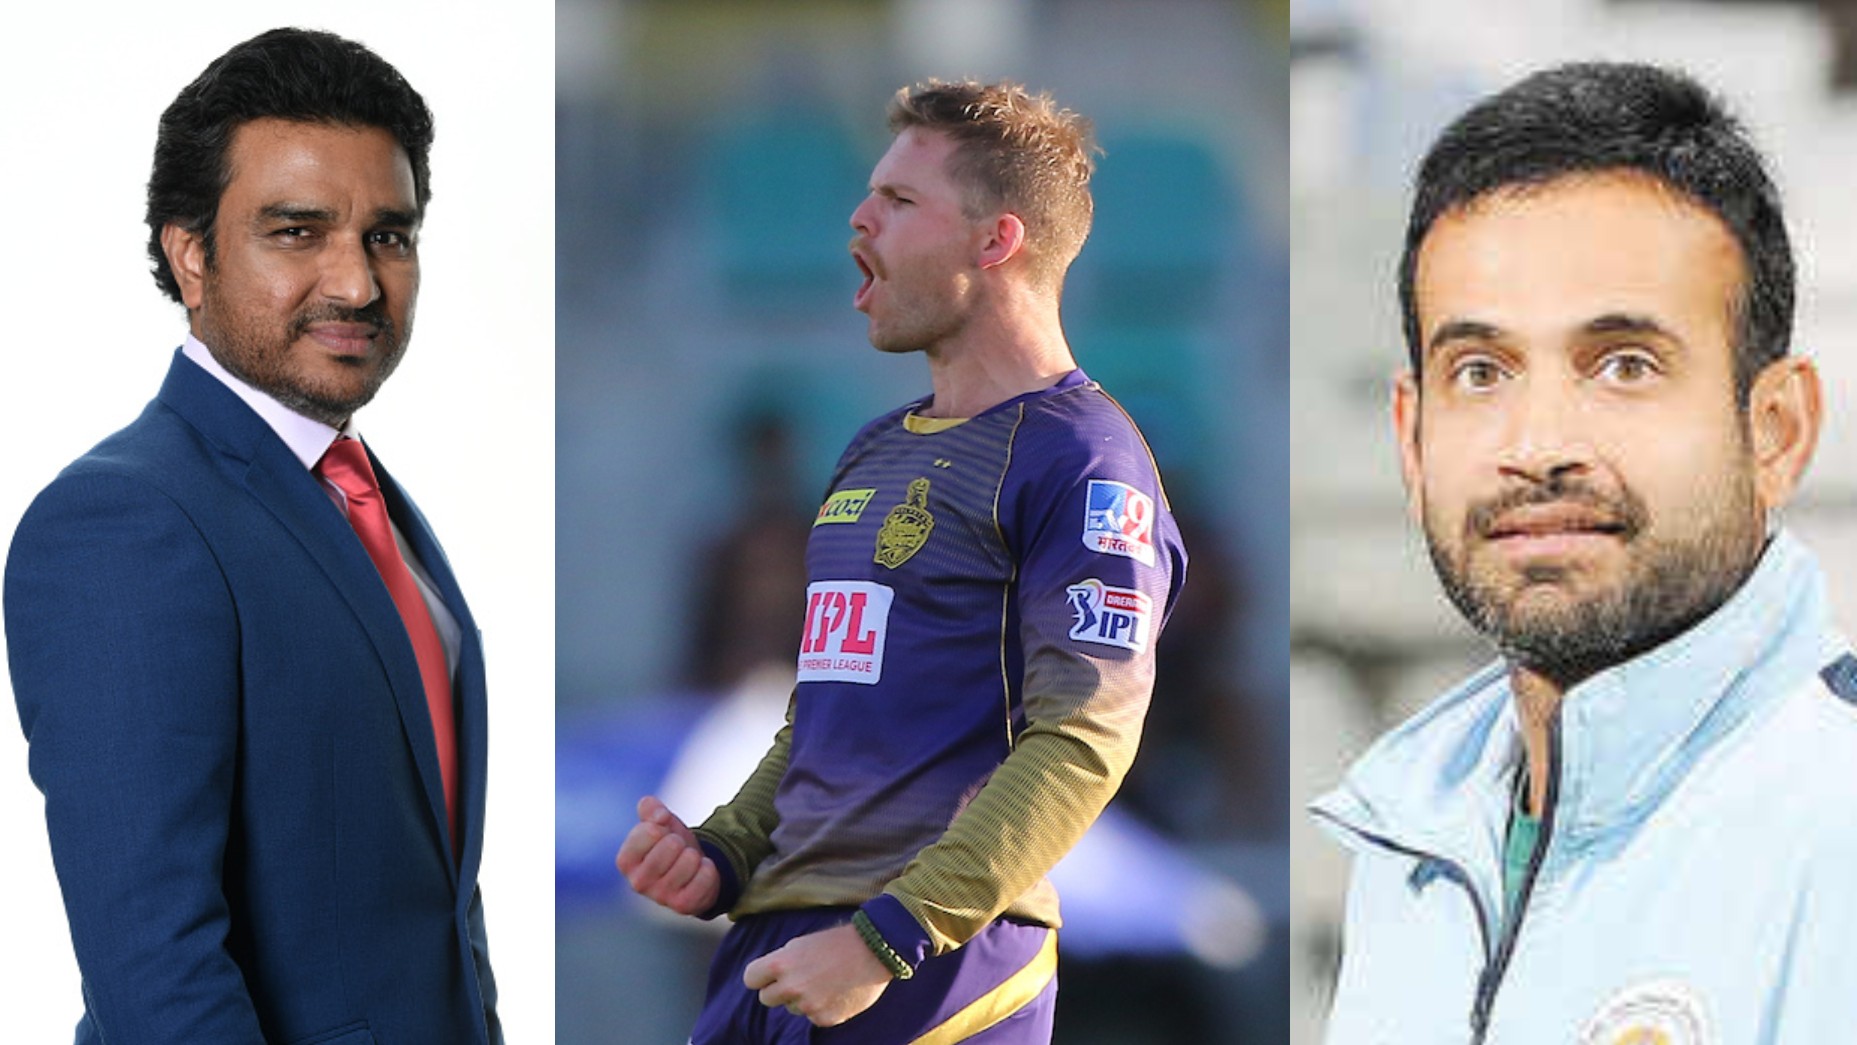 IPL 2020: Cricket fraternity reacts as Lockie Ferguson stars in KKR's exciting super over win over SRH